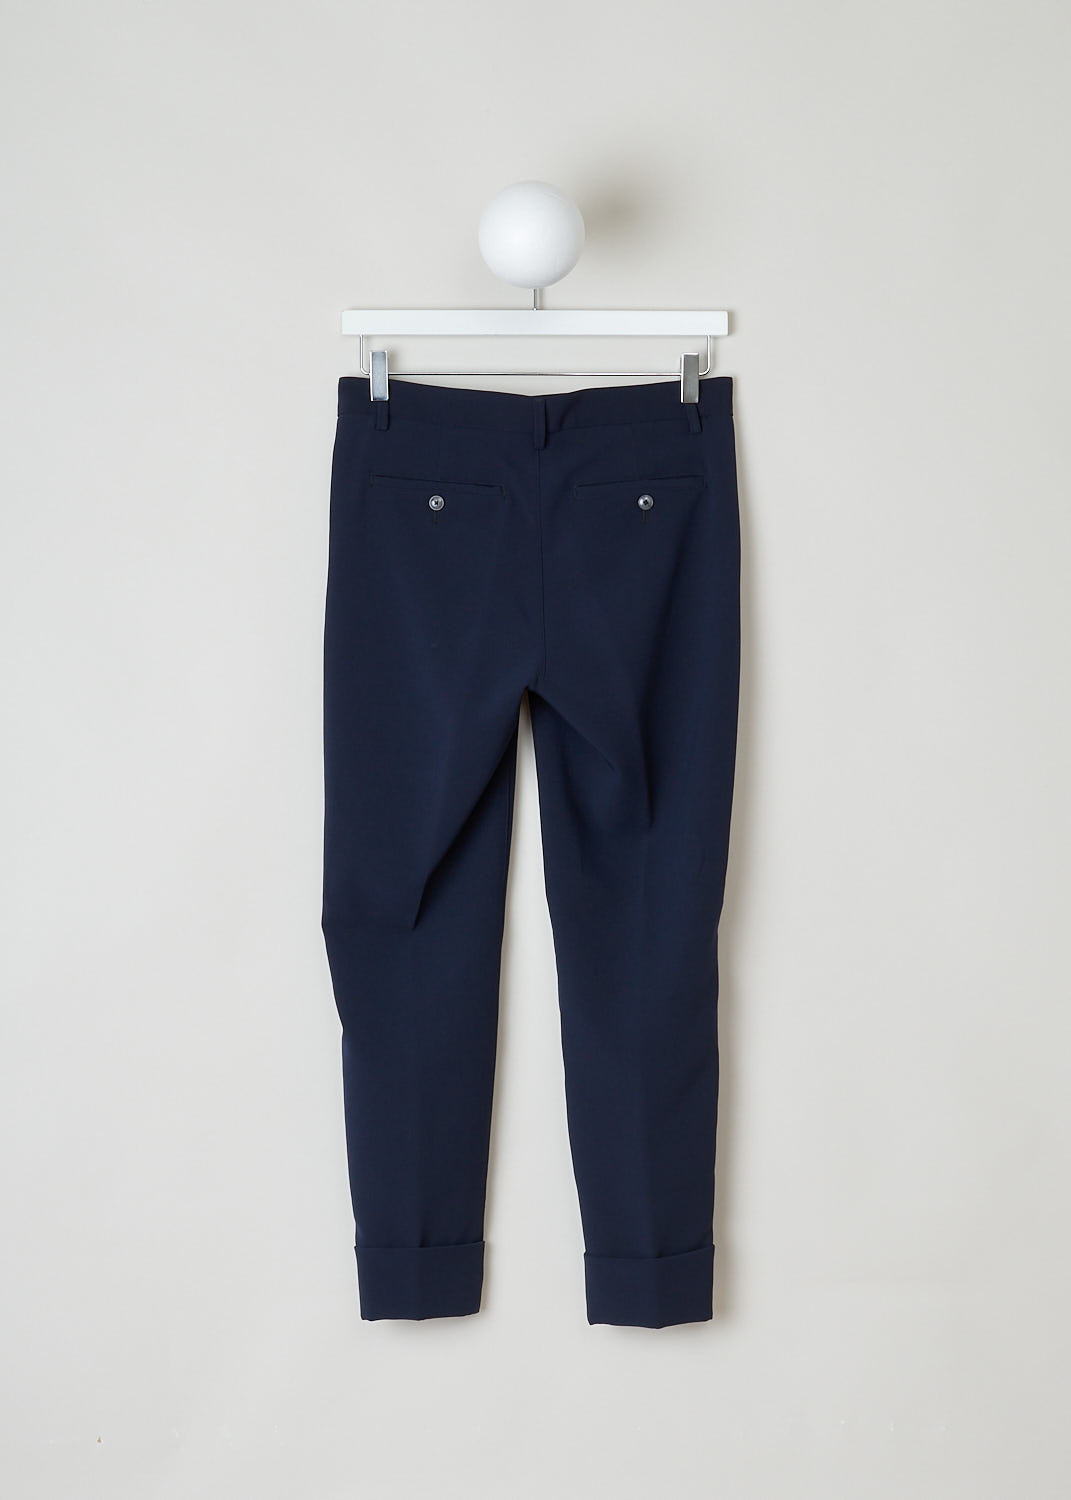 CLOSED, CLASSIC NAVY TROUSERS, Stewart_C91796_37G_22_568, Blue, Back, Made in the classic trouser model, featuring forward slanted pockets on the front and two buttoned welt pockets on the back. What makes this model stand out above the rest is the broad fold-over hem.